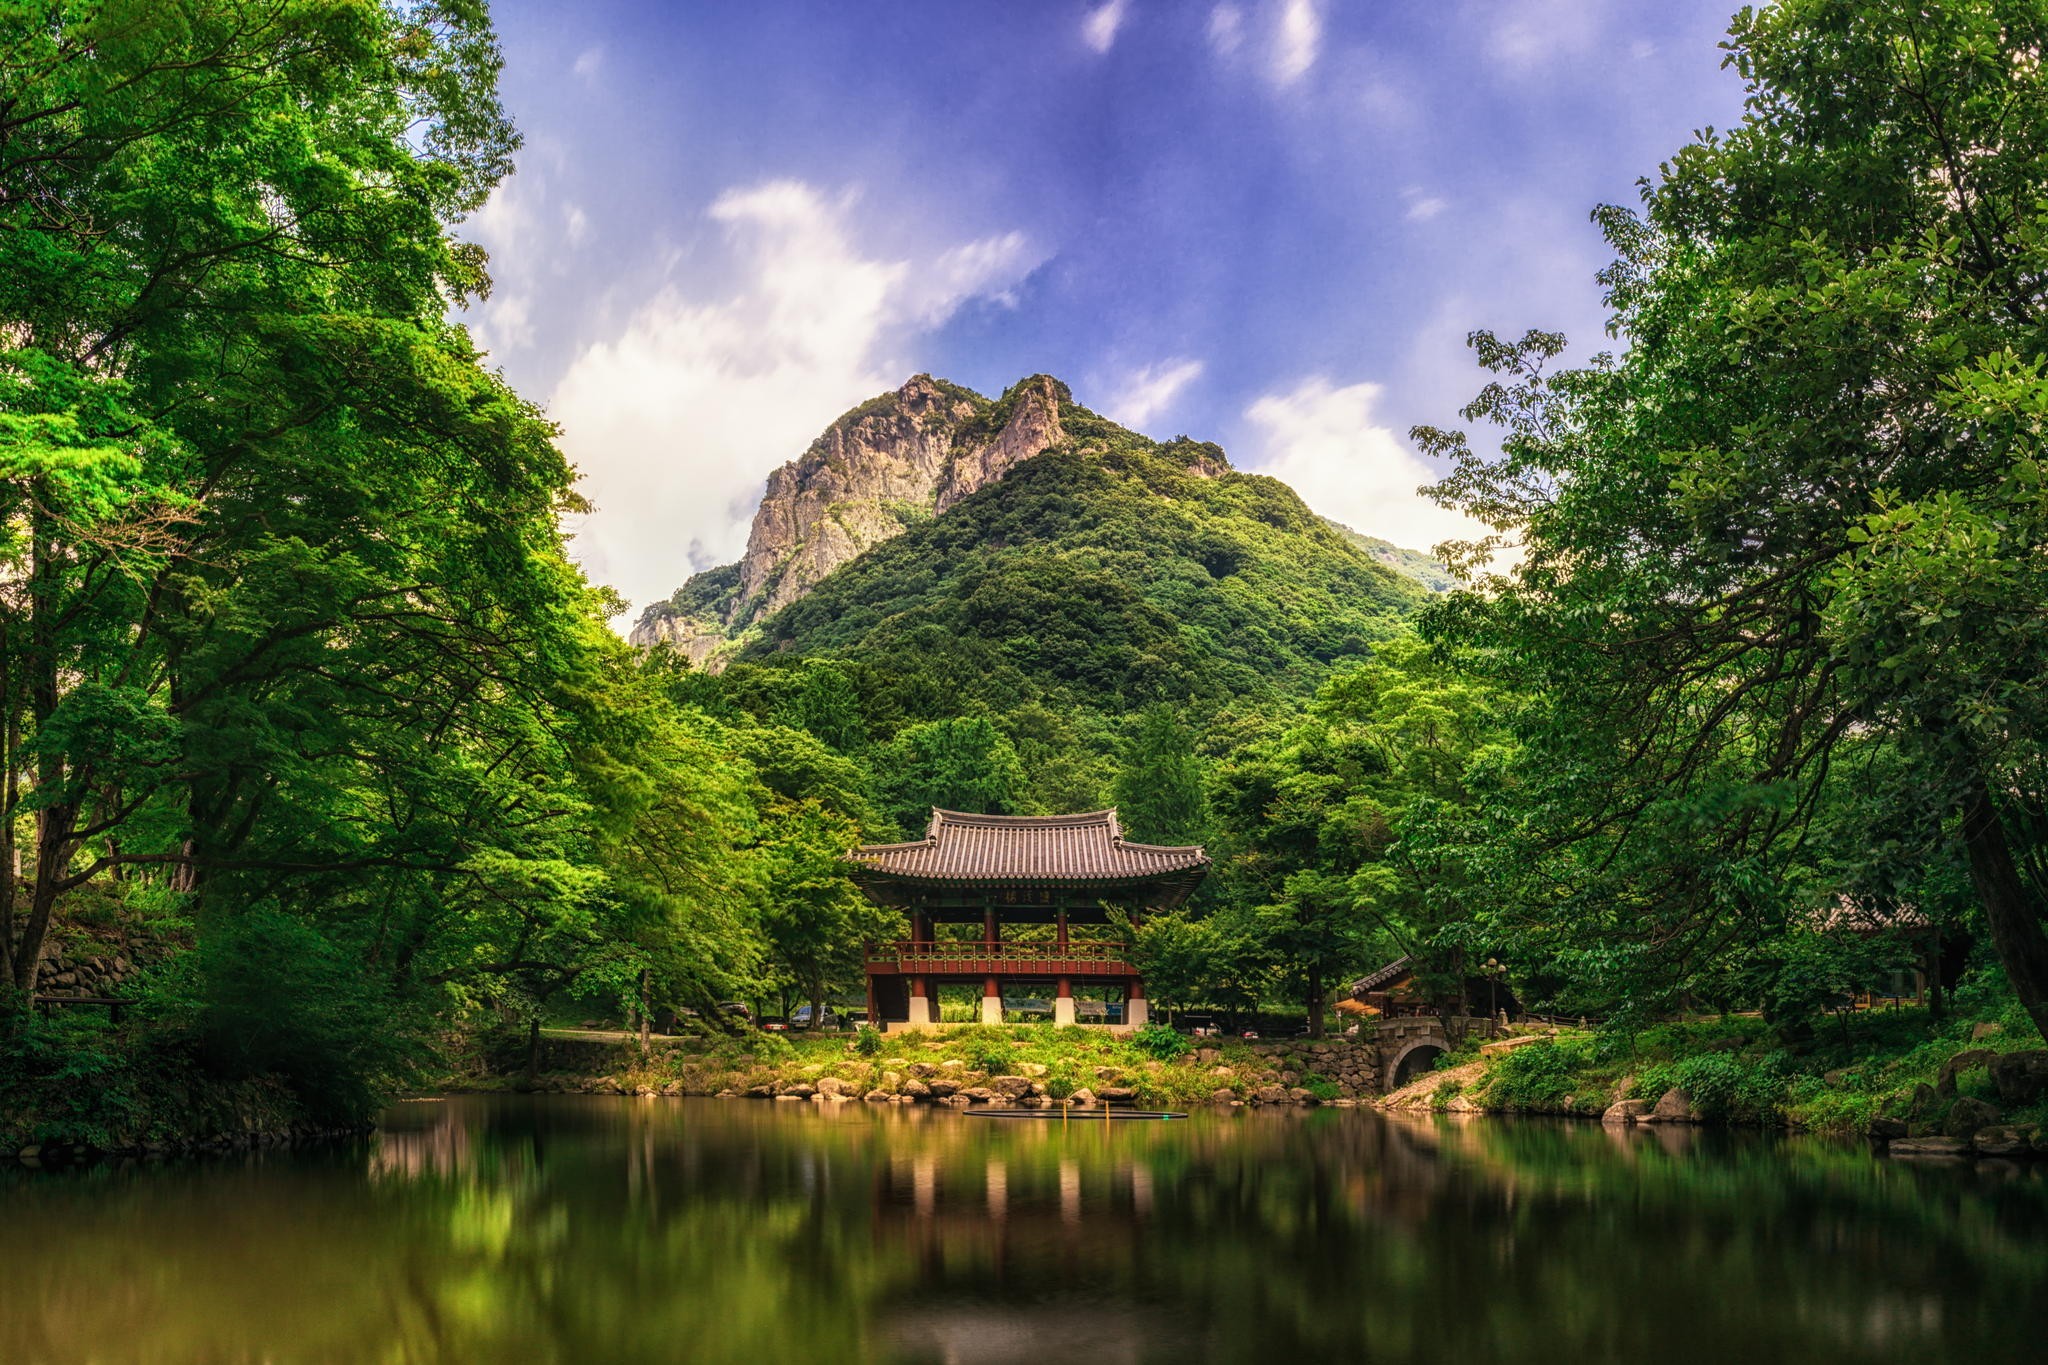 General 2048x1365 nature landscape mountains trees forest house lake South Korea clouds reflection bridge Asia